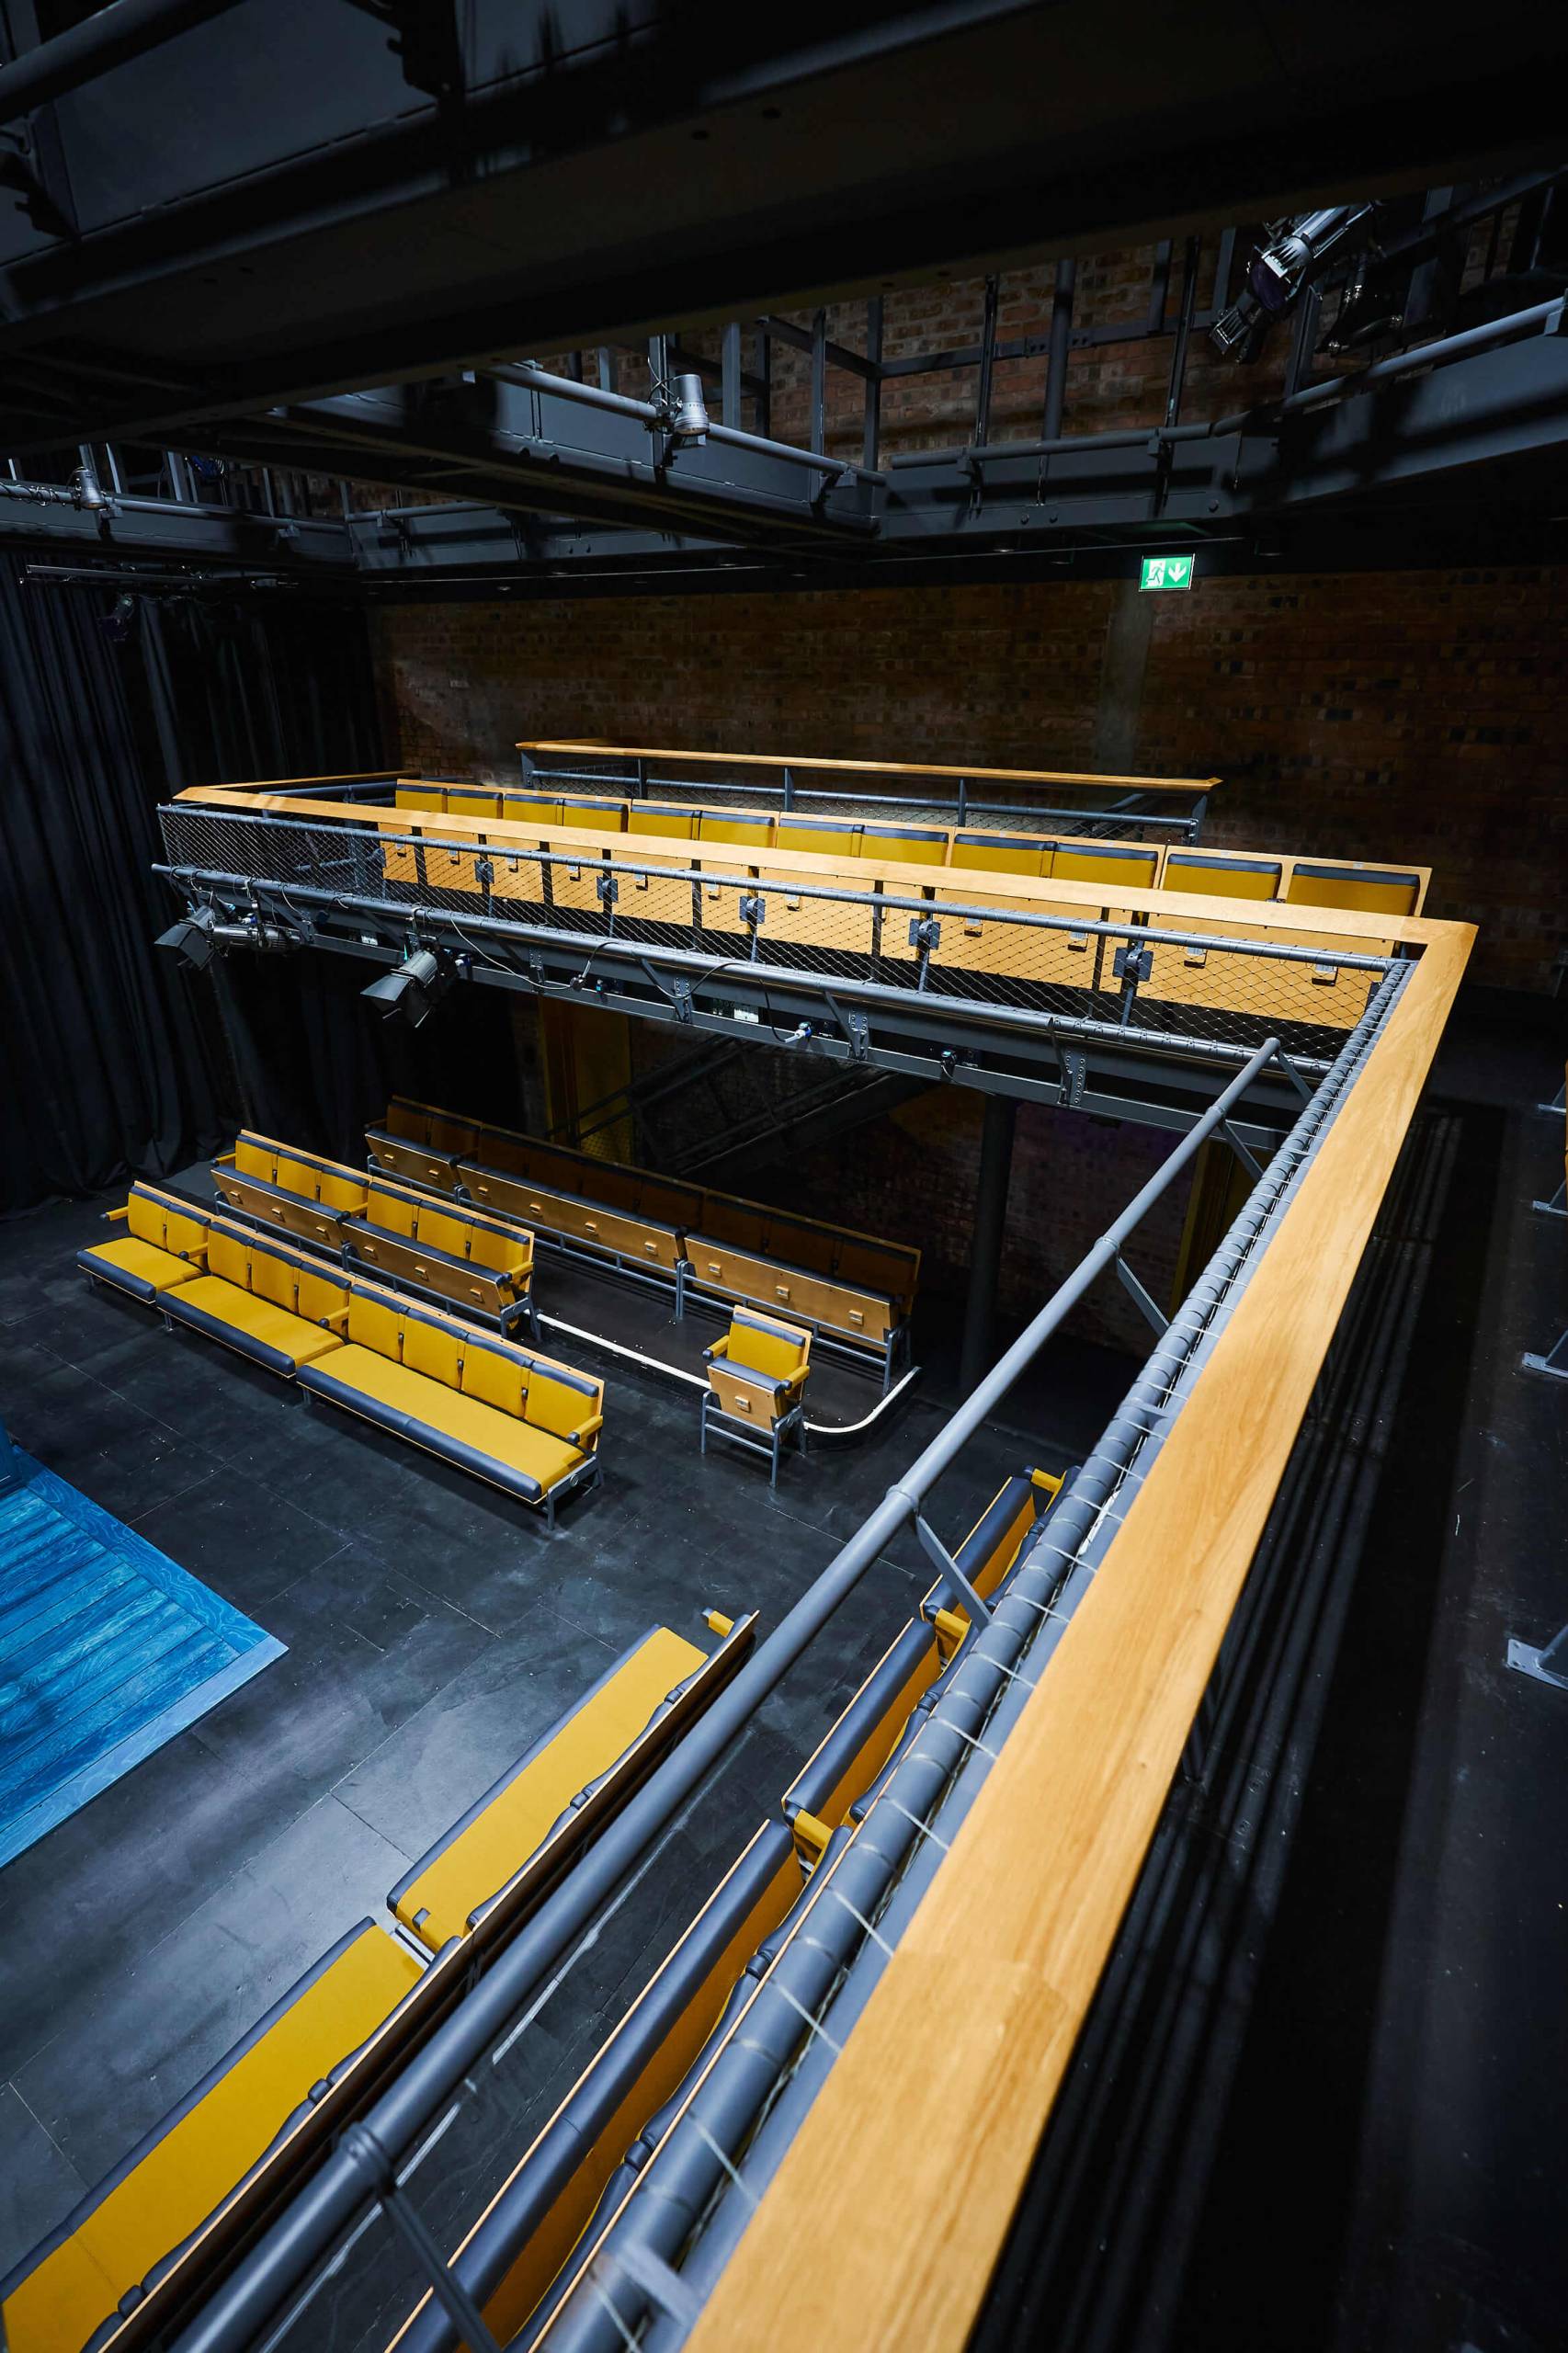 Row of gallery seats overlooking a studio stage